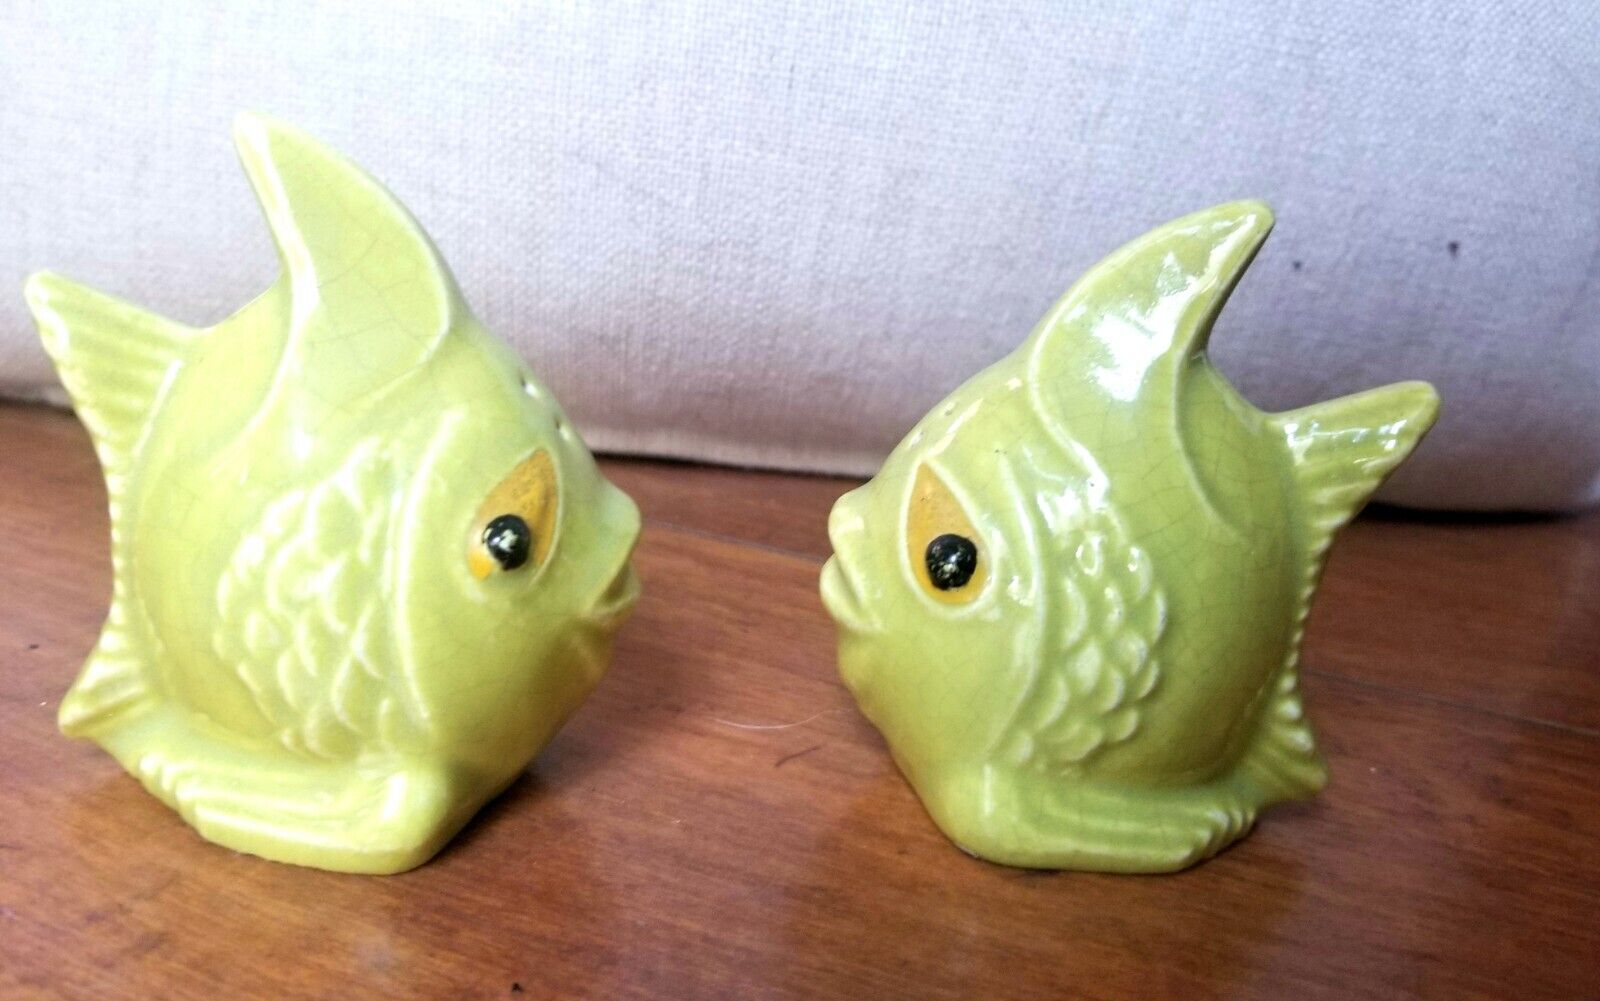 Fish salt & pepper shakers Ugly/Cute? Odd, Eclectic Kitsch,Vintage Green Ceramic